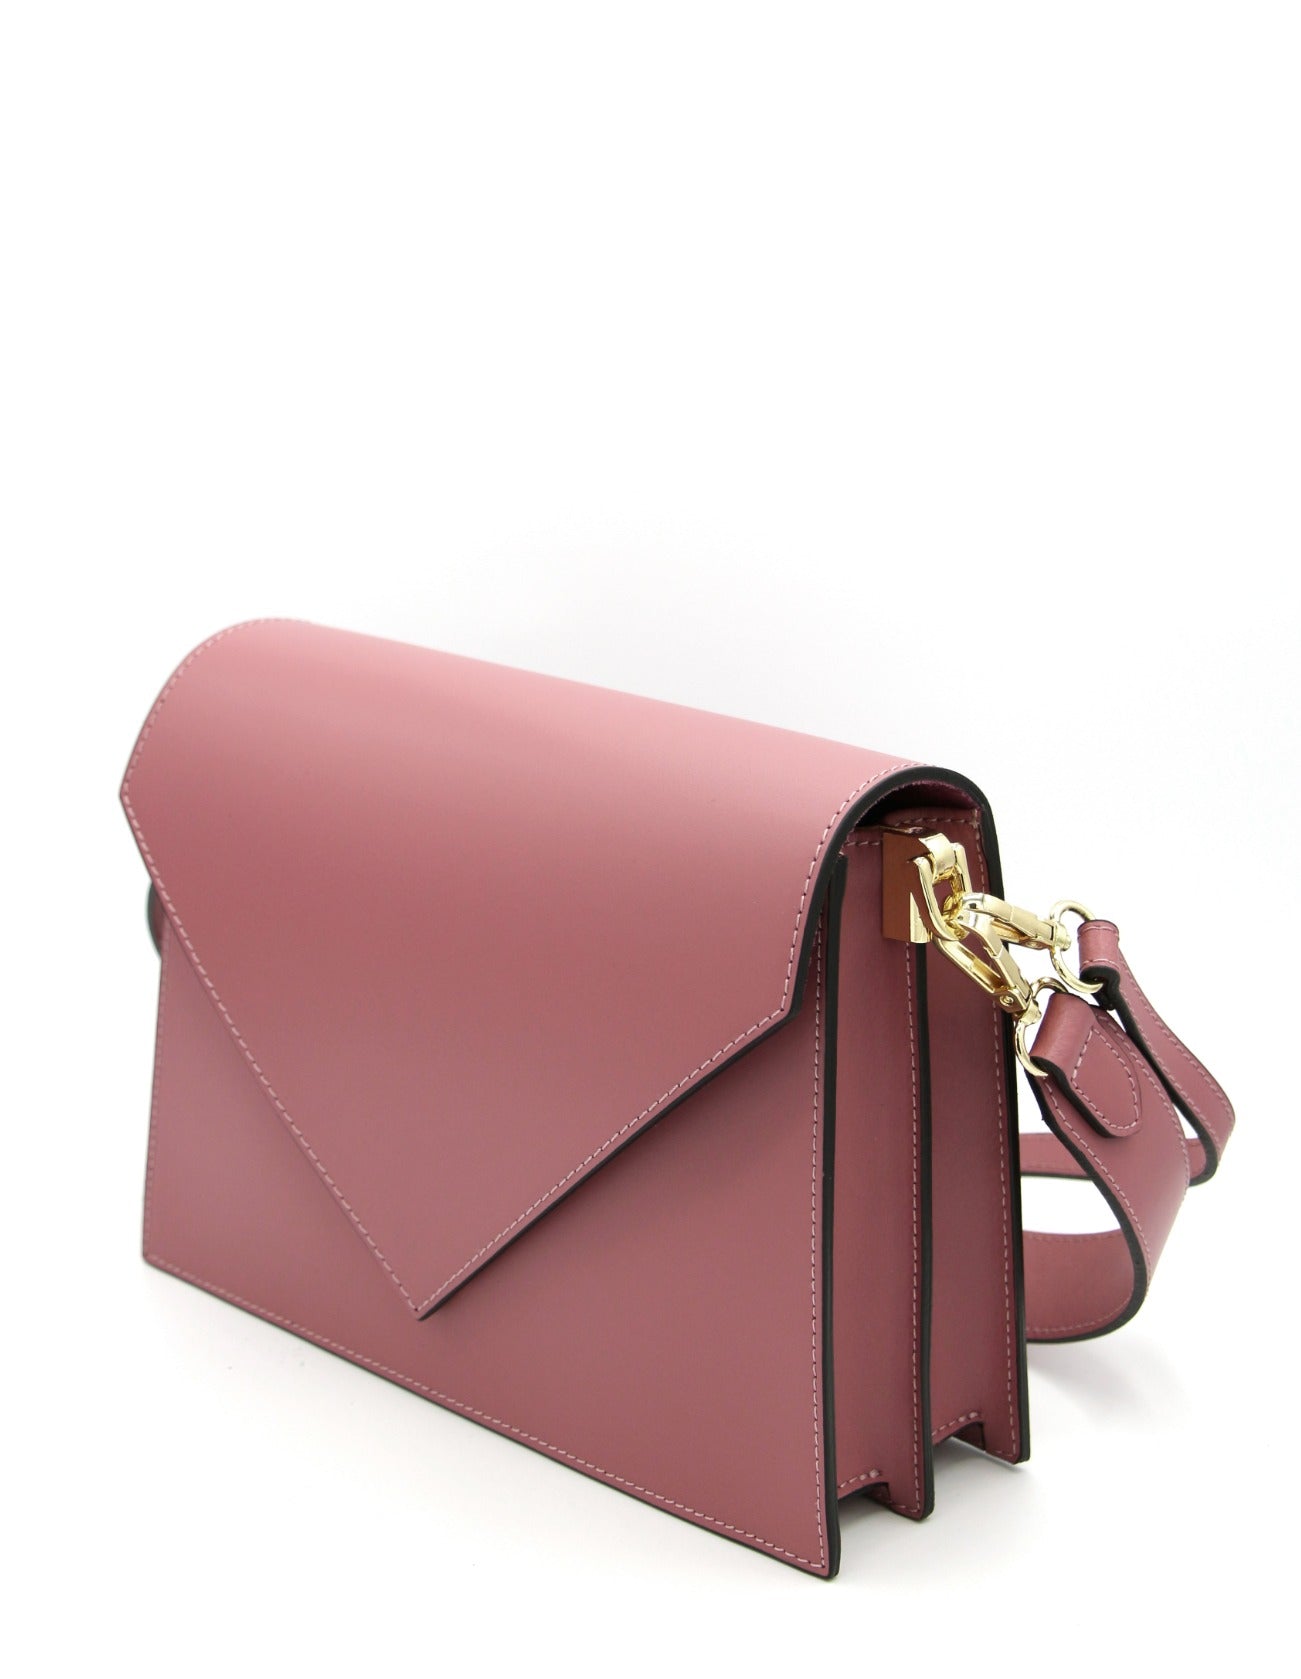 Double shoulder bag with triangular flap - PINK